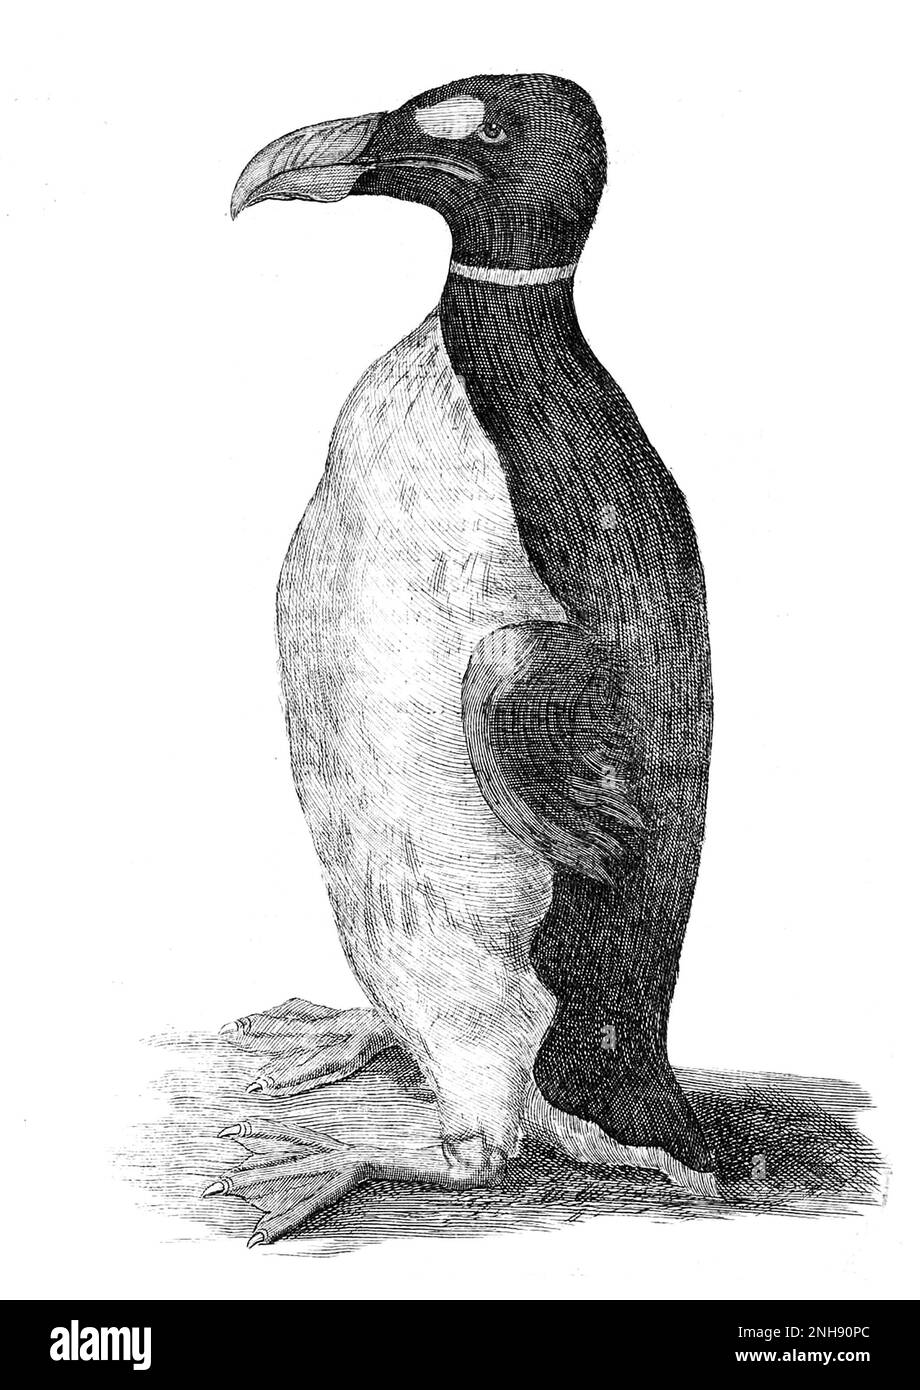 Only known illustration of a Great Auk drawn from life. This was the pet of Danish physician and natural historian Olaus Wormius a.k.a. Ole Worm (1588-1654). He received it from the Faroe Islands and it was featured in his book Museum Wormianum, 1655. The great auk (Pinguinus impennis) is a species of flightless alcid that became extinct in the mid-19th century. It was the only modern species in the genus Pinguinus. Stock Photo